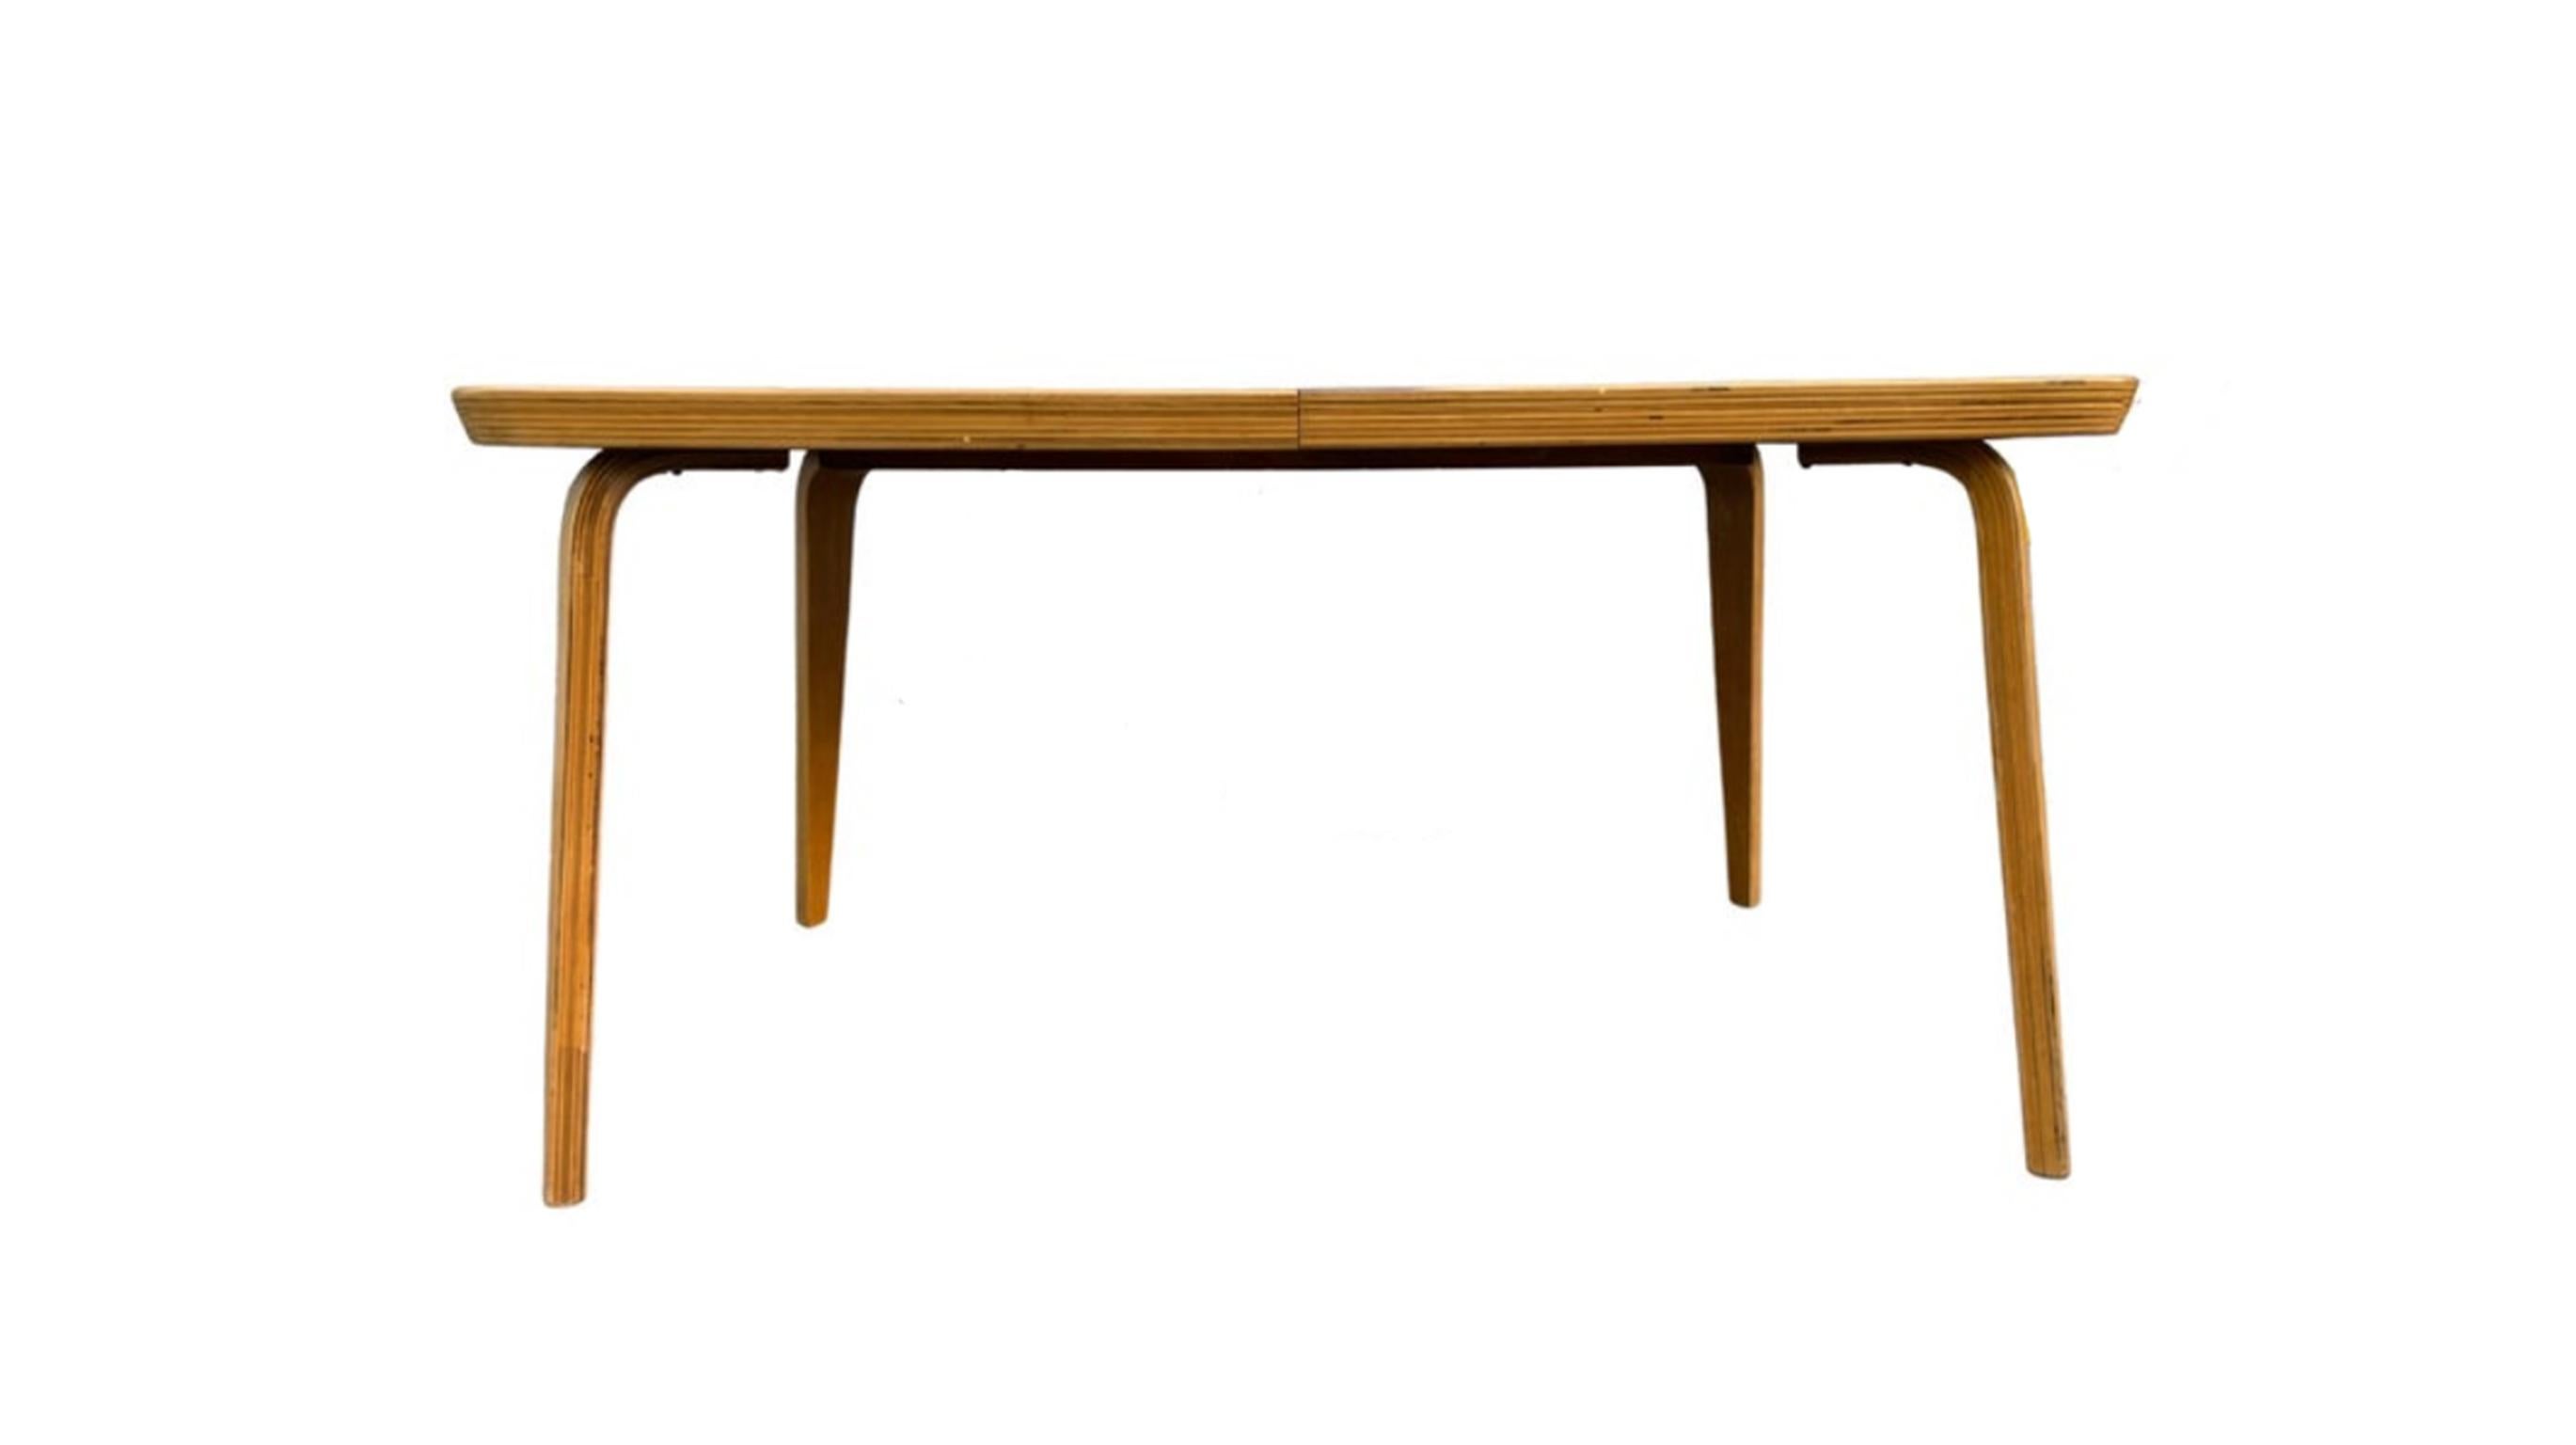 American Mid-Century Modern Bentwood Rounded Corner Birch Blonde Dining Table with Leaf